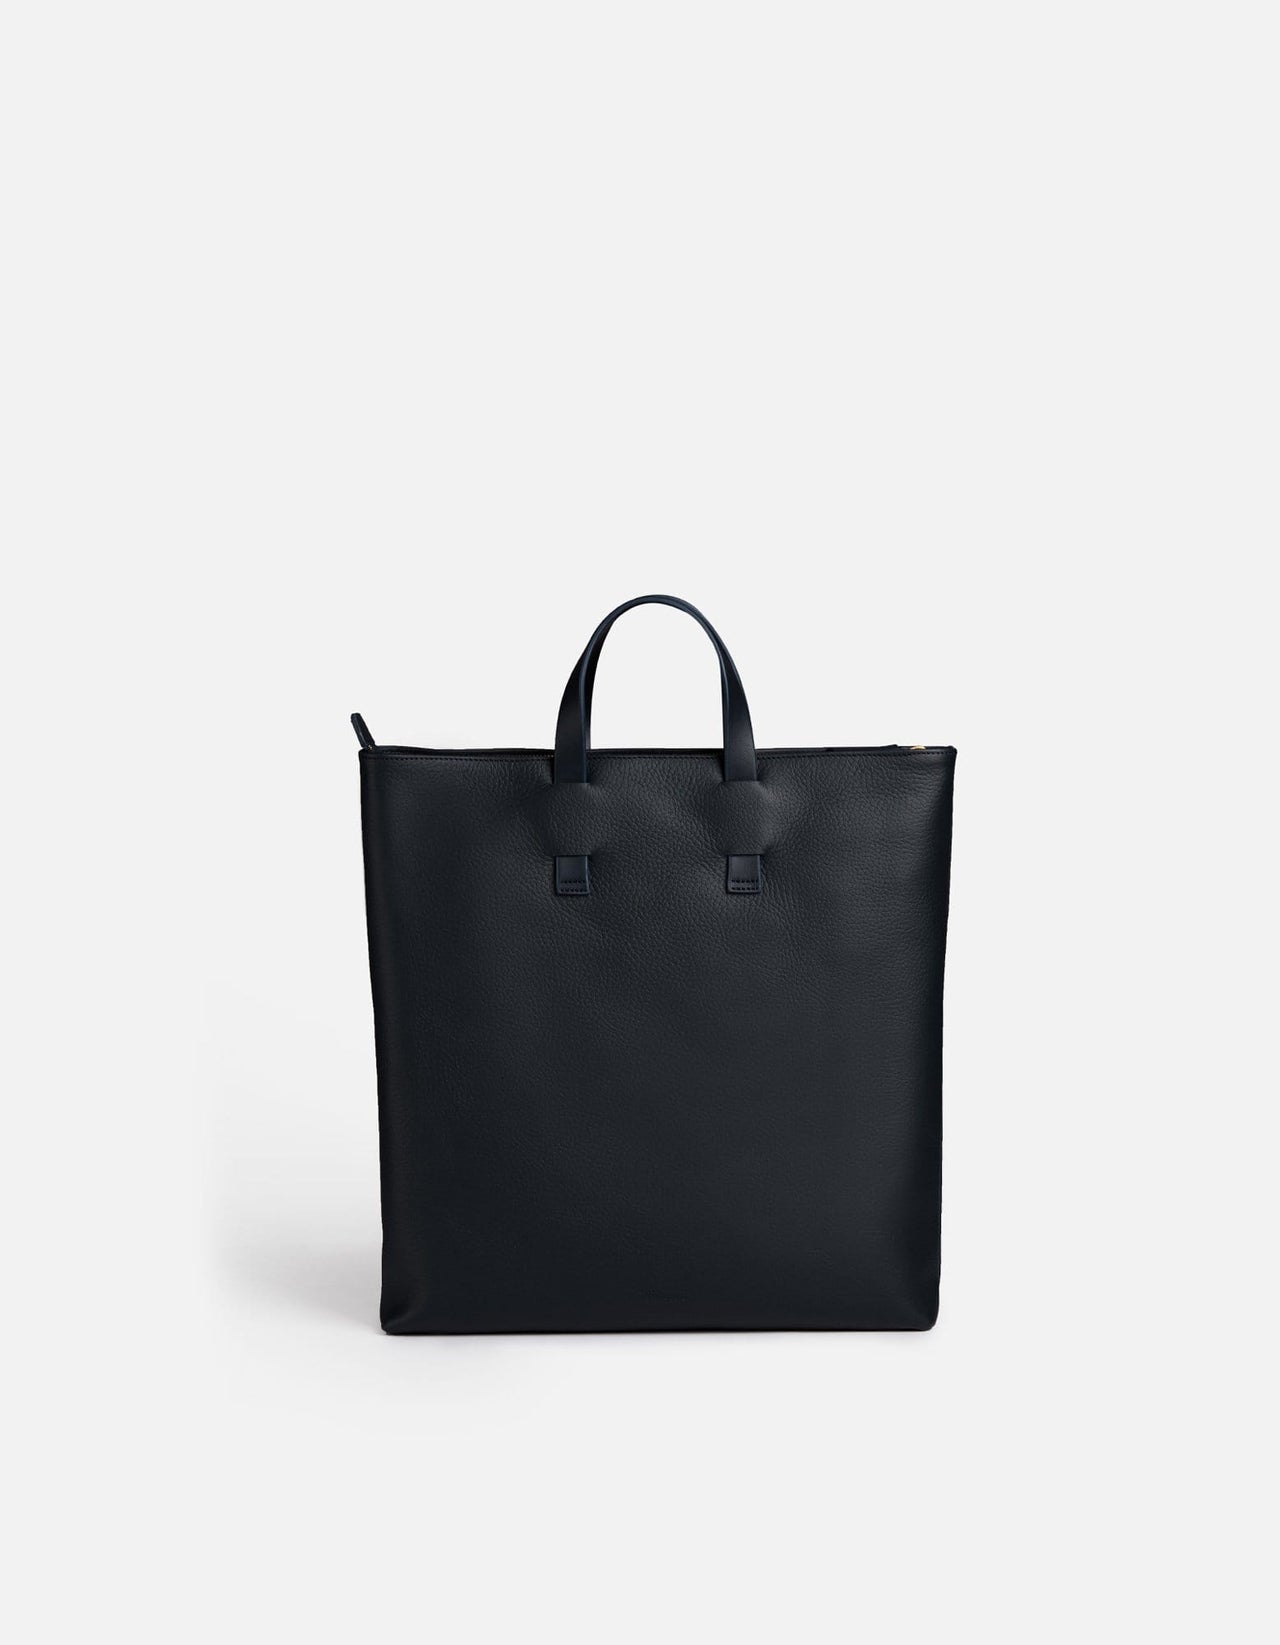 Slim Tote, Navy Blue Textured Leather | Women's Leather Bags | Miansai